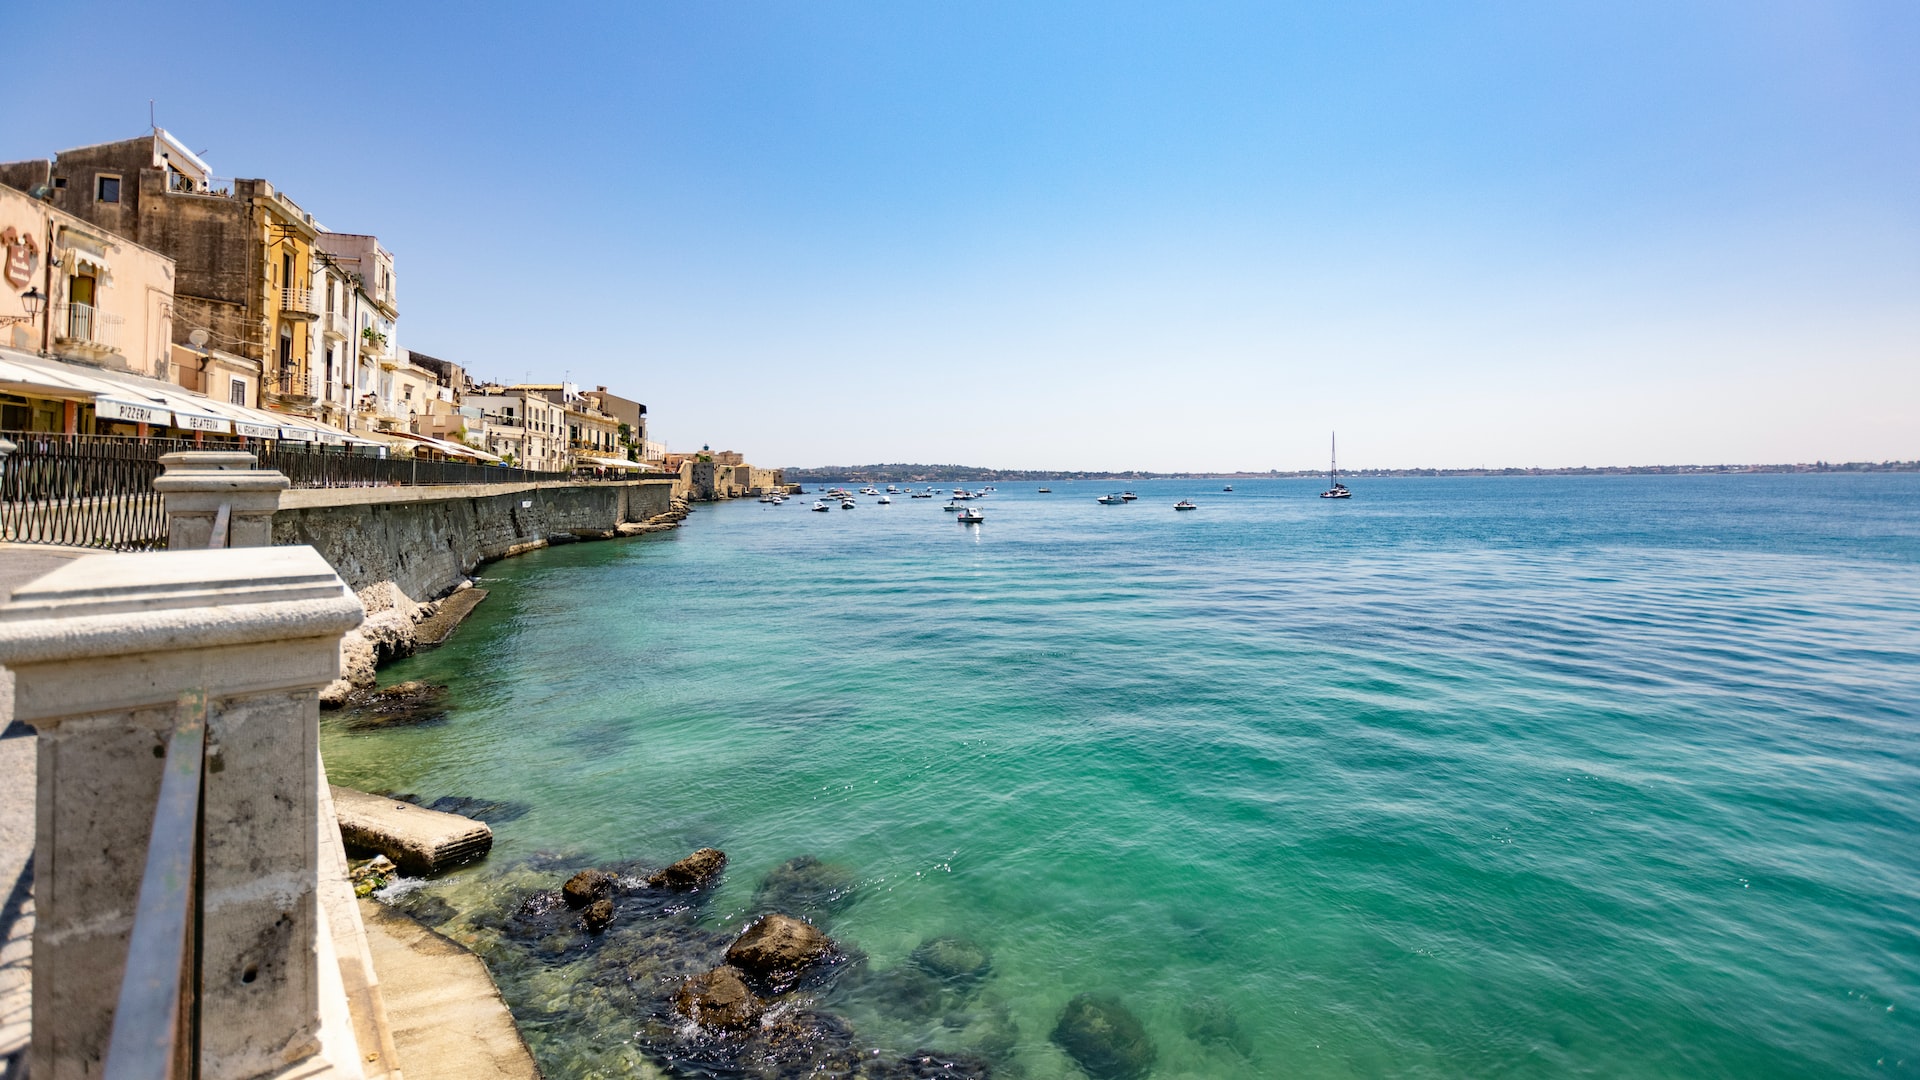 The seaside city of Syracuse is one of the best cities in Italy